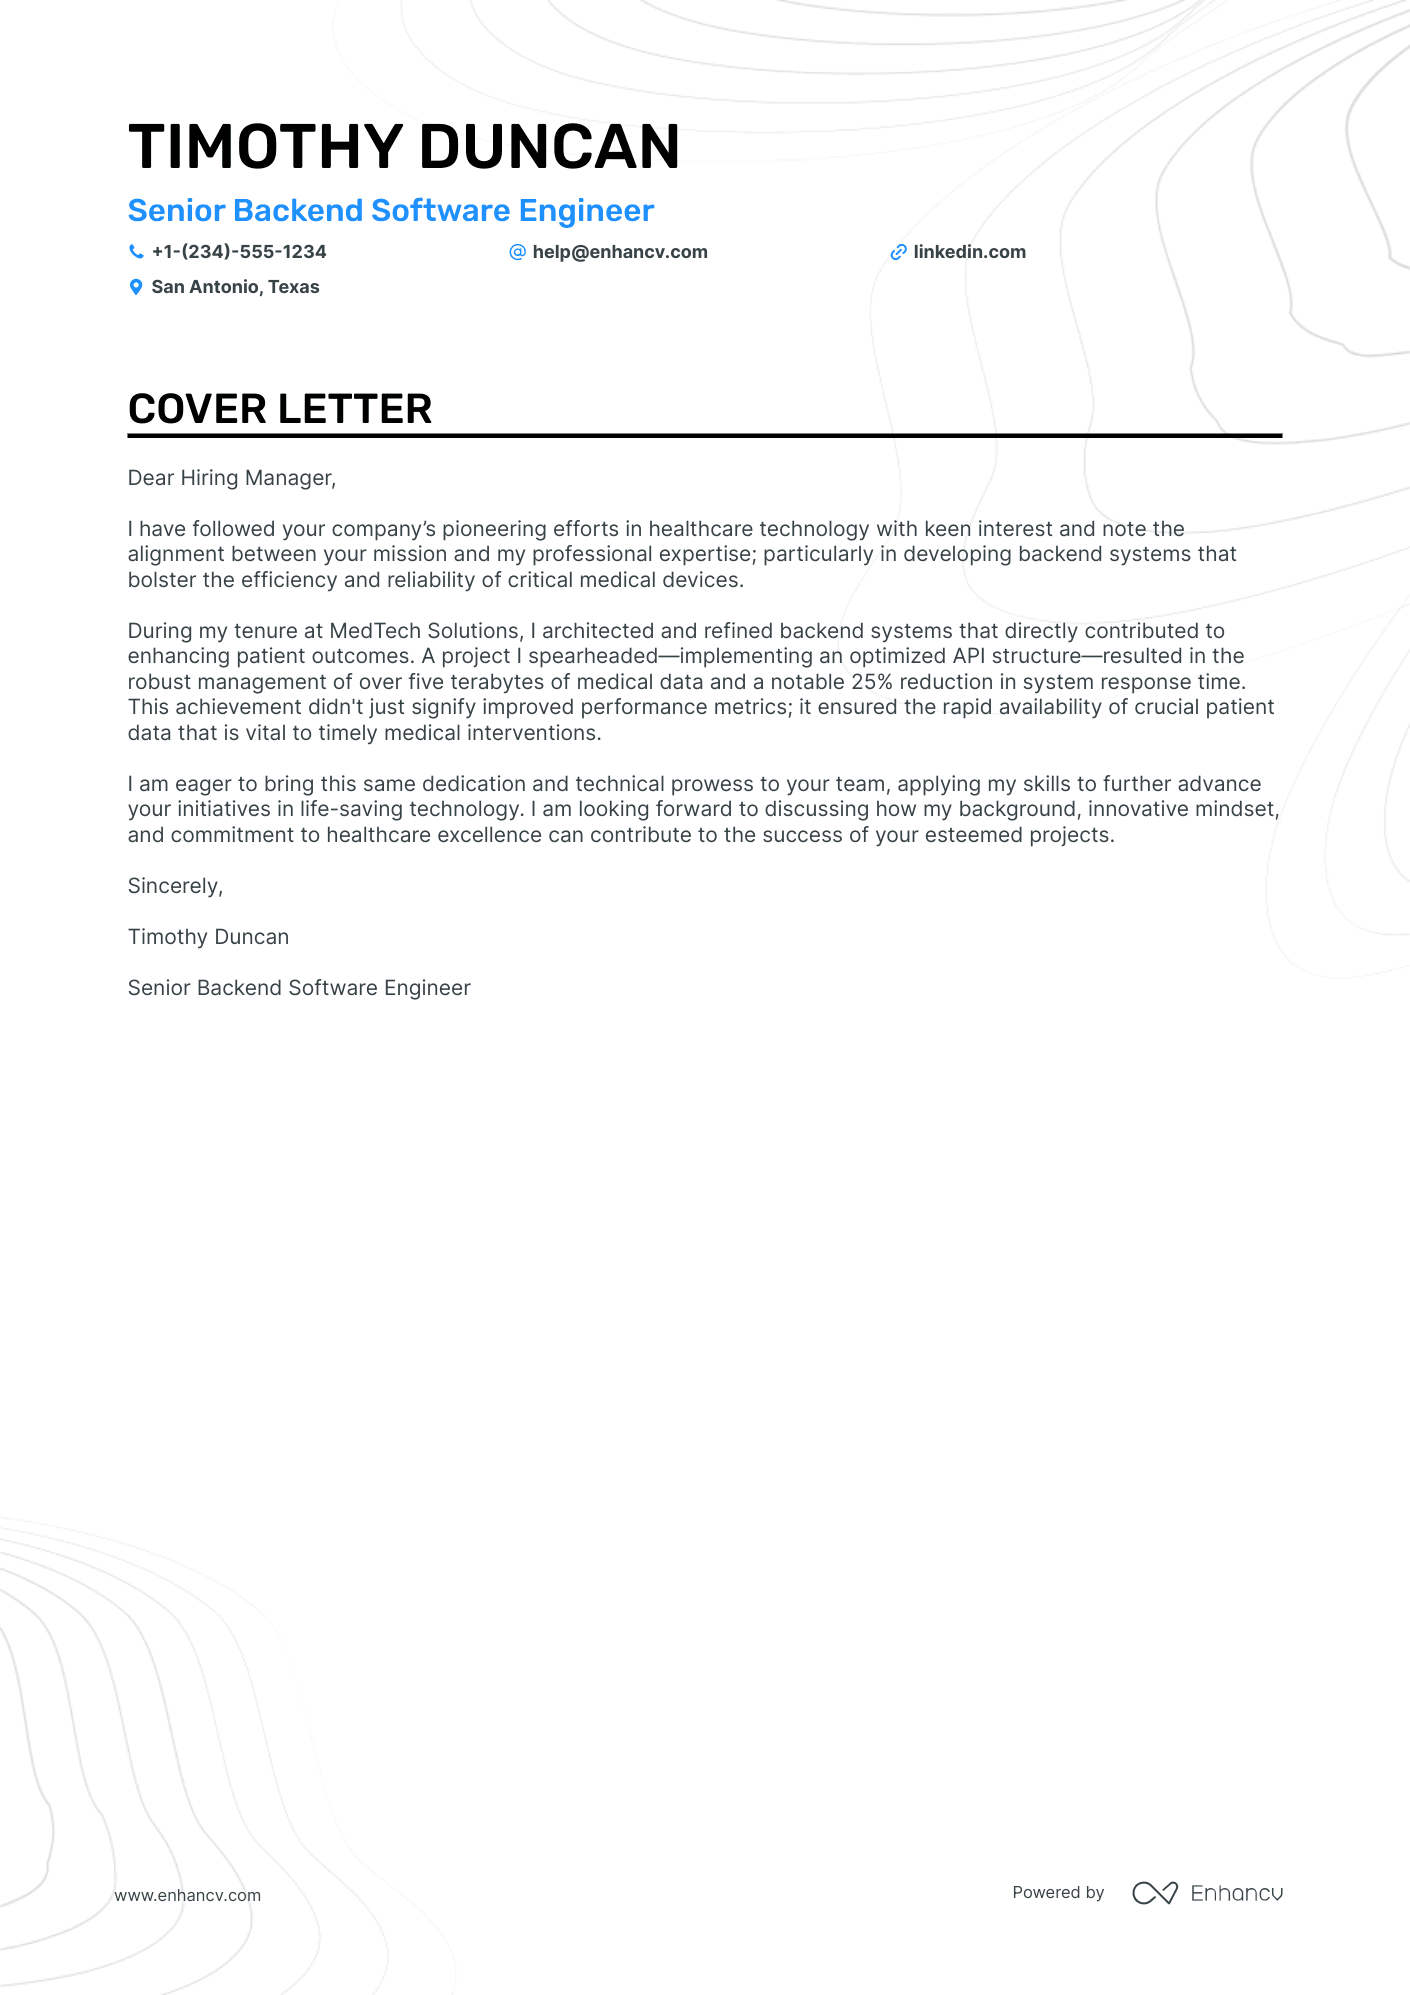 Cloud Security Engineer cover letter